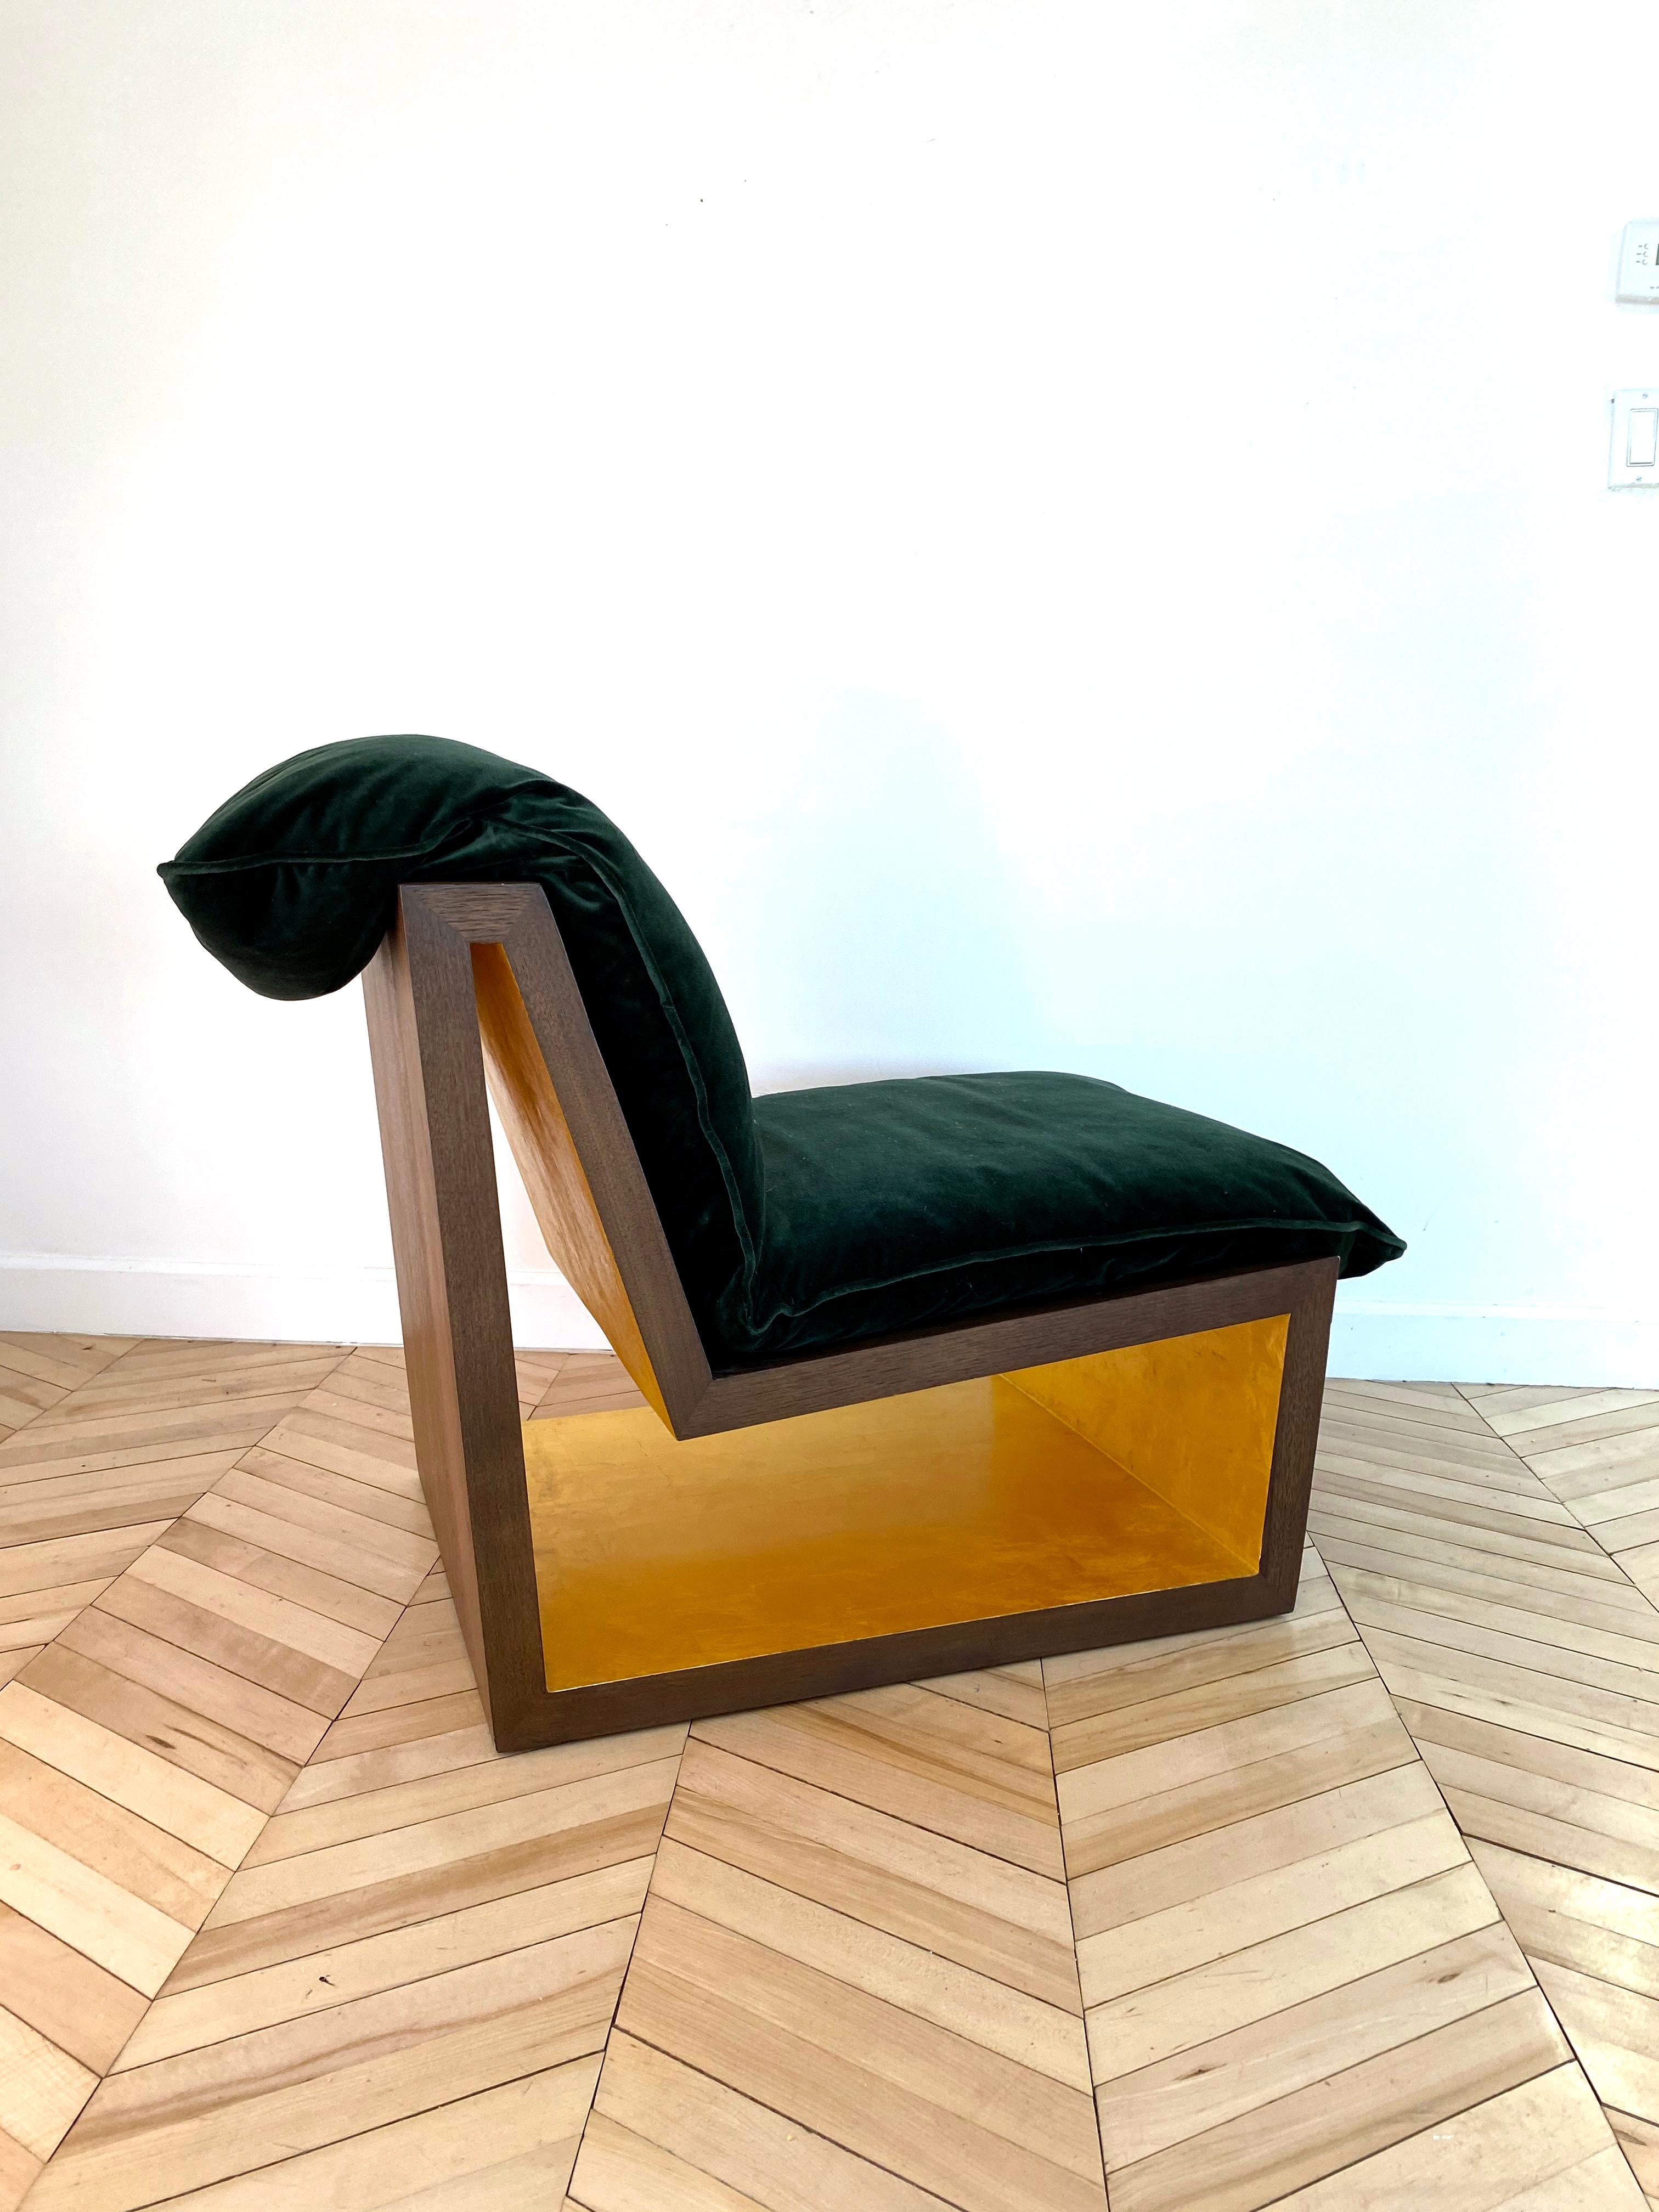 American Tucker Lounge Chair, Contemporary, Walnut and Gold Leaf, by Dean and Dahl